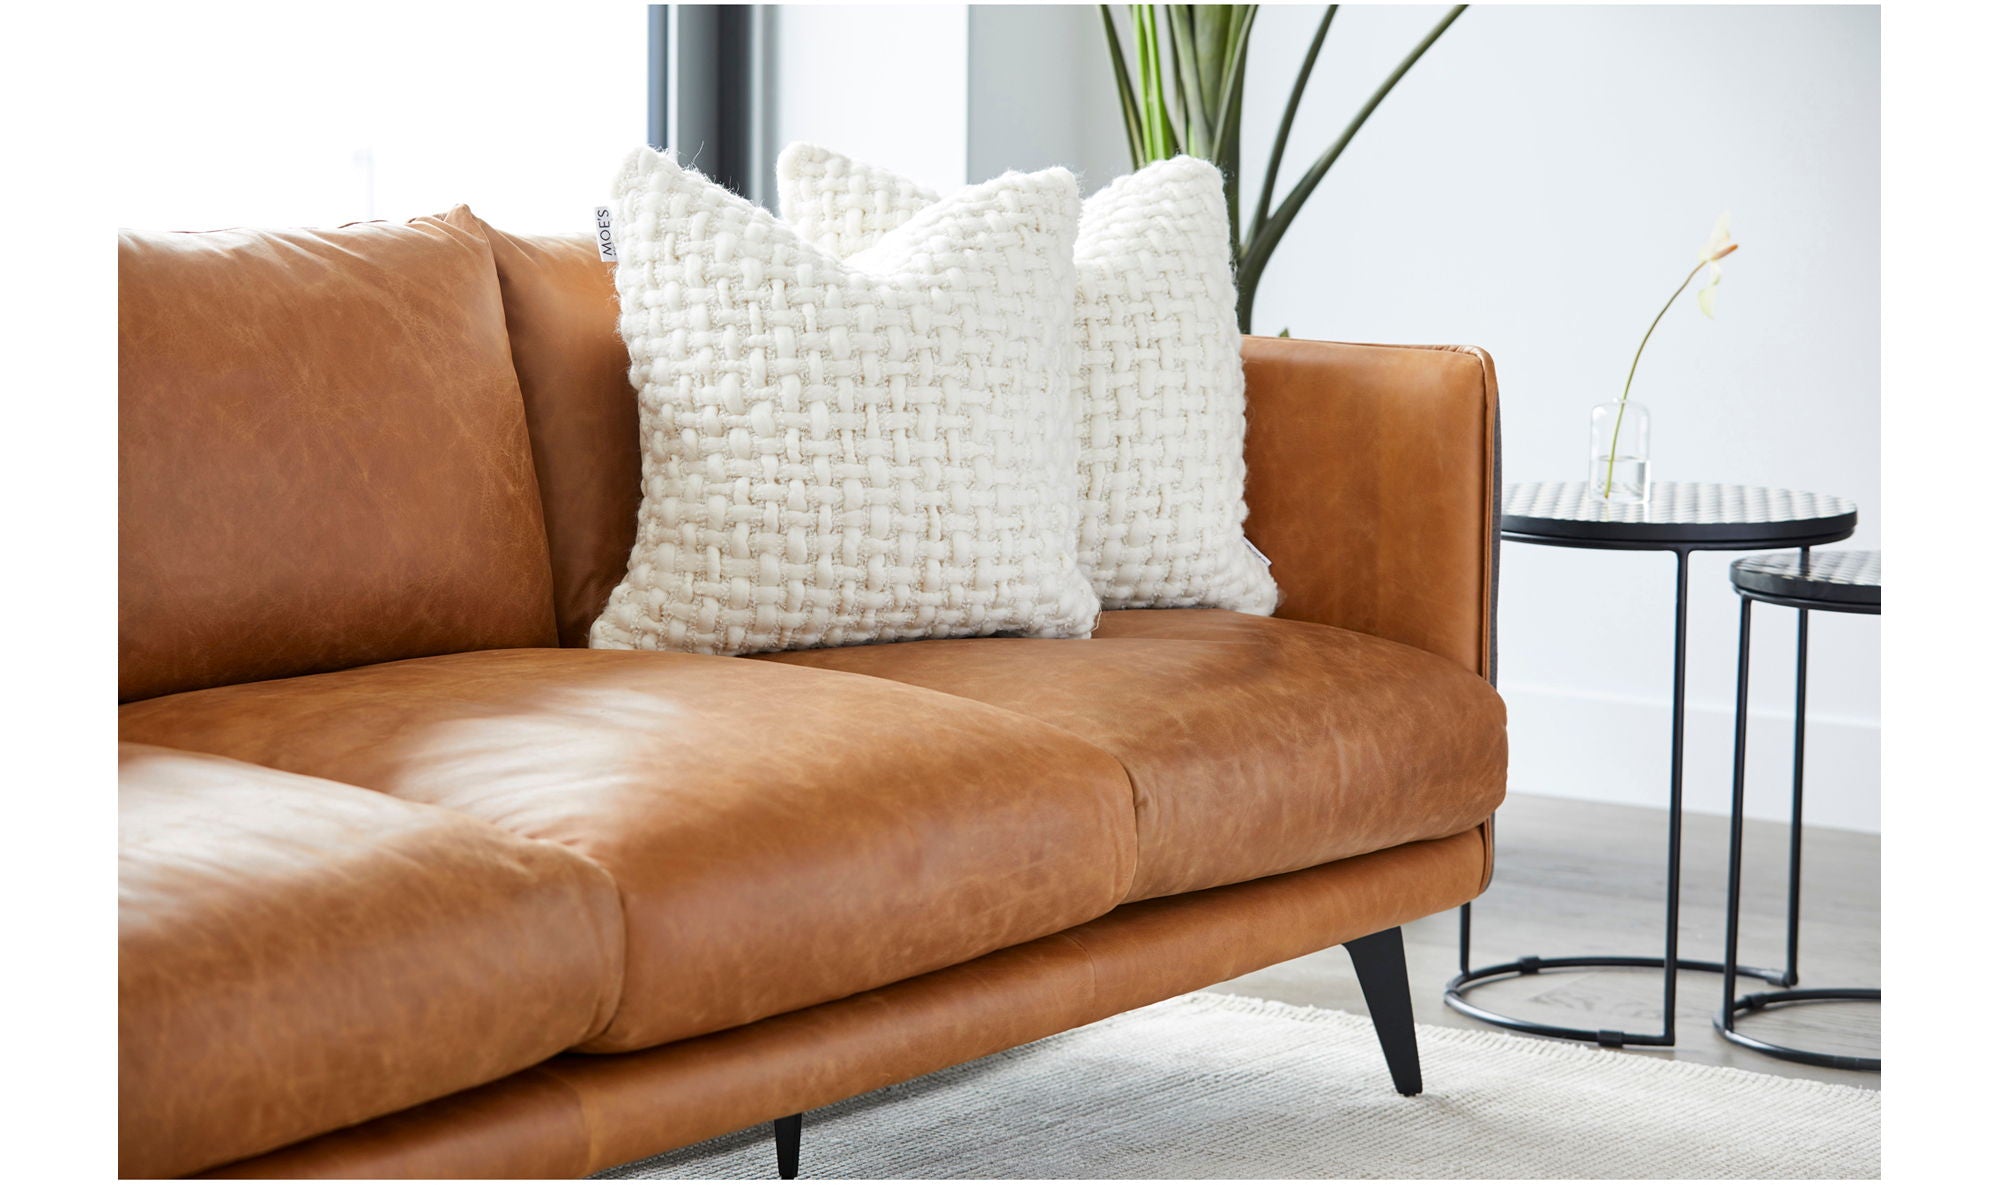 Messina Leather Sofa - Cognac Brown Top-Grain Leather - Stylish and Comfortable Living Room Furniture